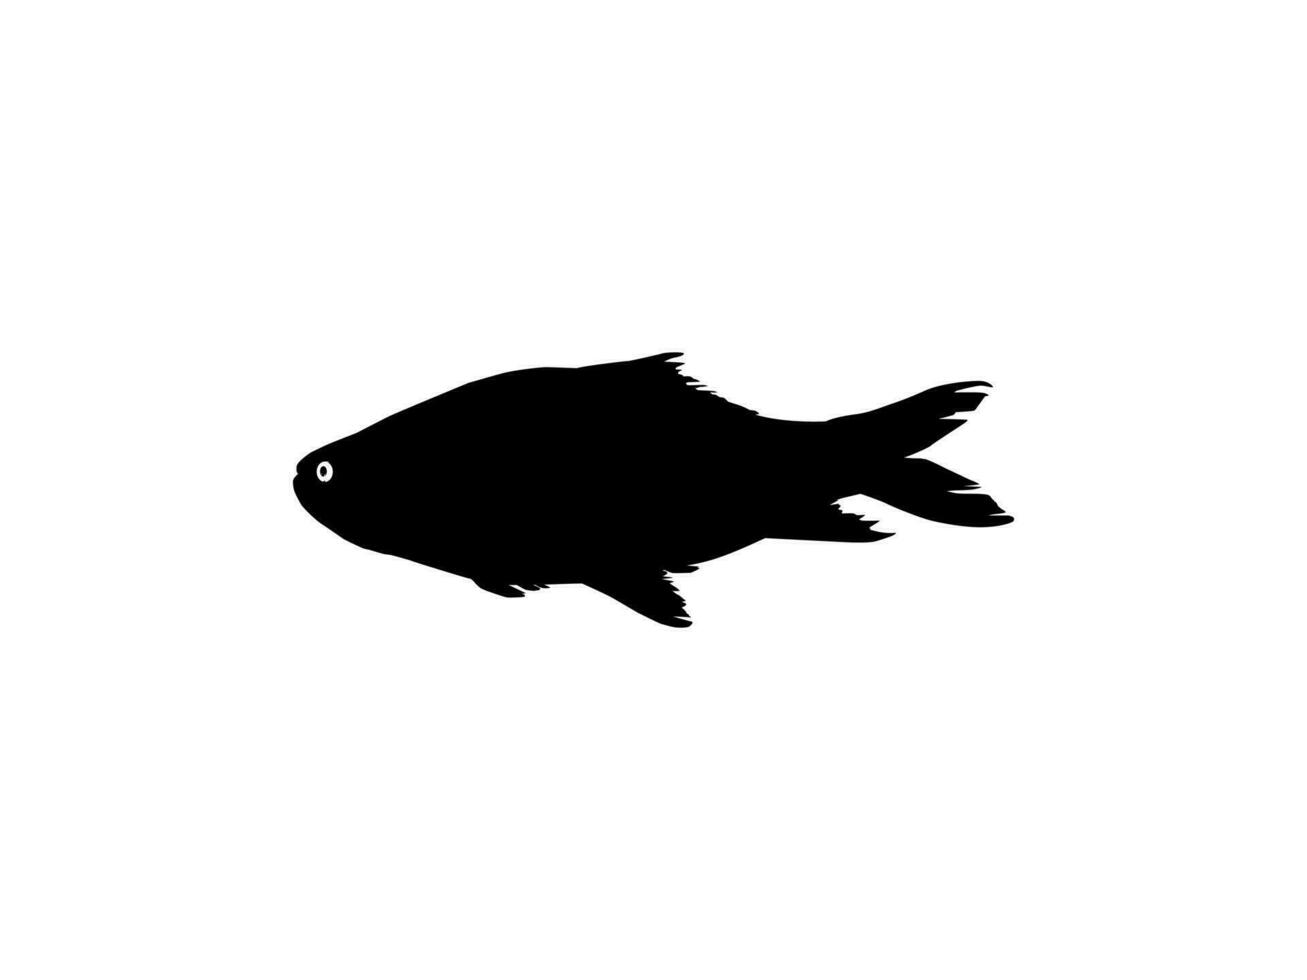 Catla or Katla Fish, also known as the major South Asian Carp, Silhouette for Icon, Symbol, Logo Type, Pictogram, Apps, Website or Graphic Design Element. Vector Illustration